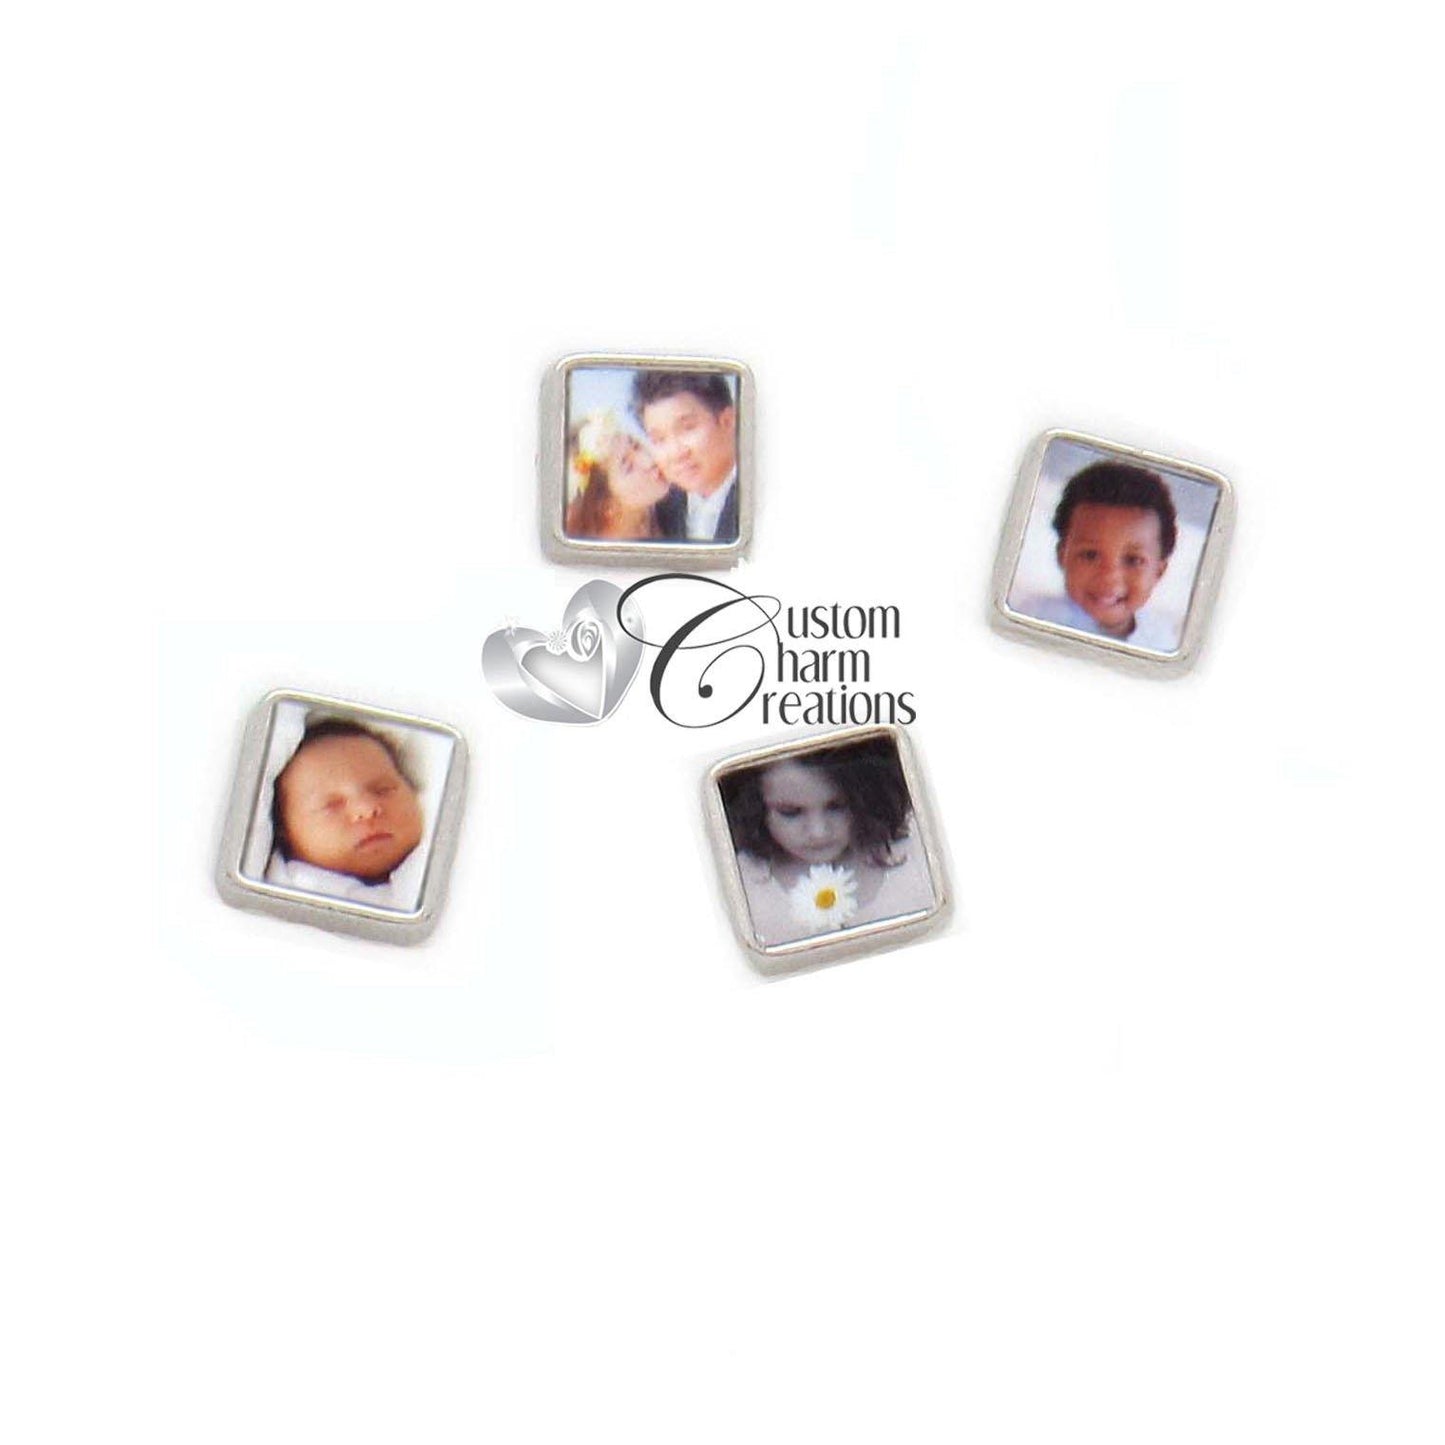 8mm Square Picture Charm for Floating Lockets Personalized Using Your Photo - Custom Charm Creations